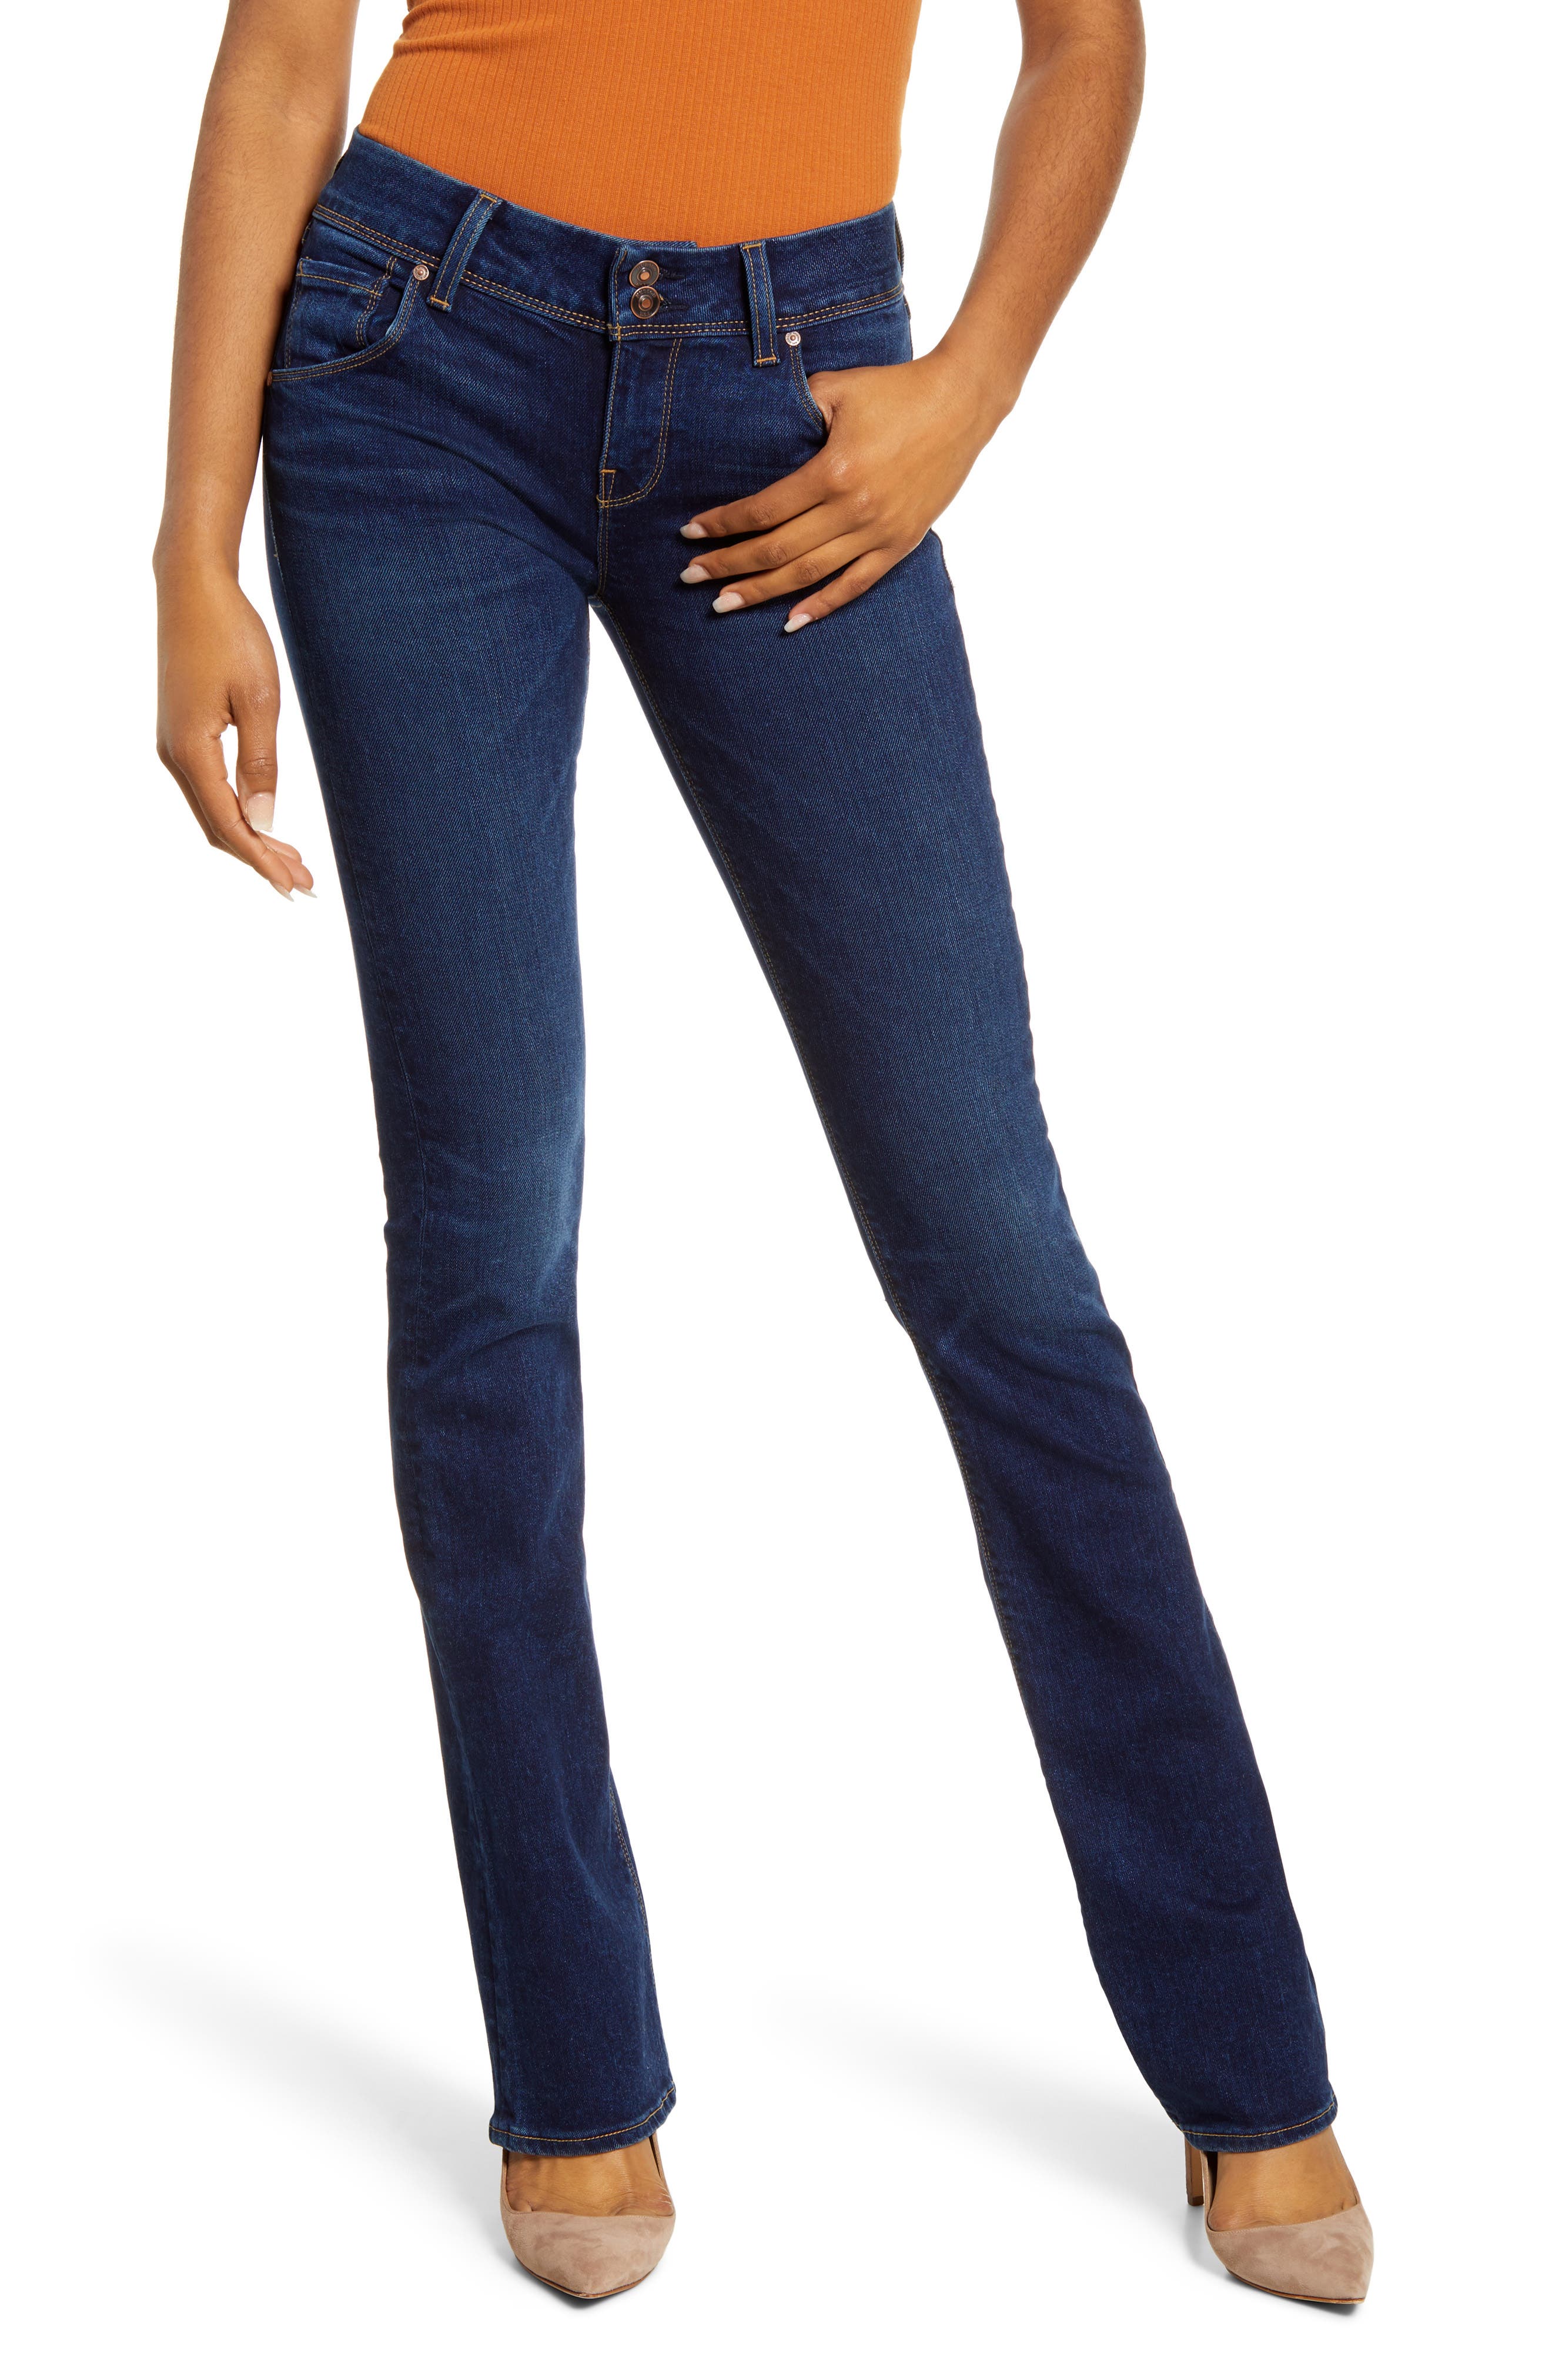 Hudson Jeans Womens Signature Boot Jean in Hackney